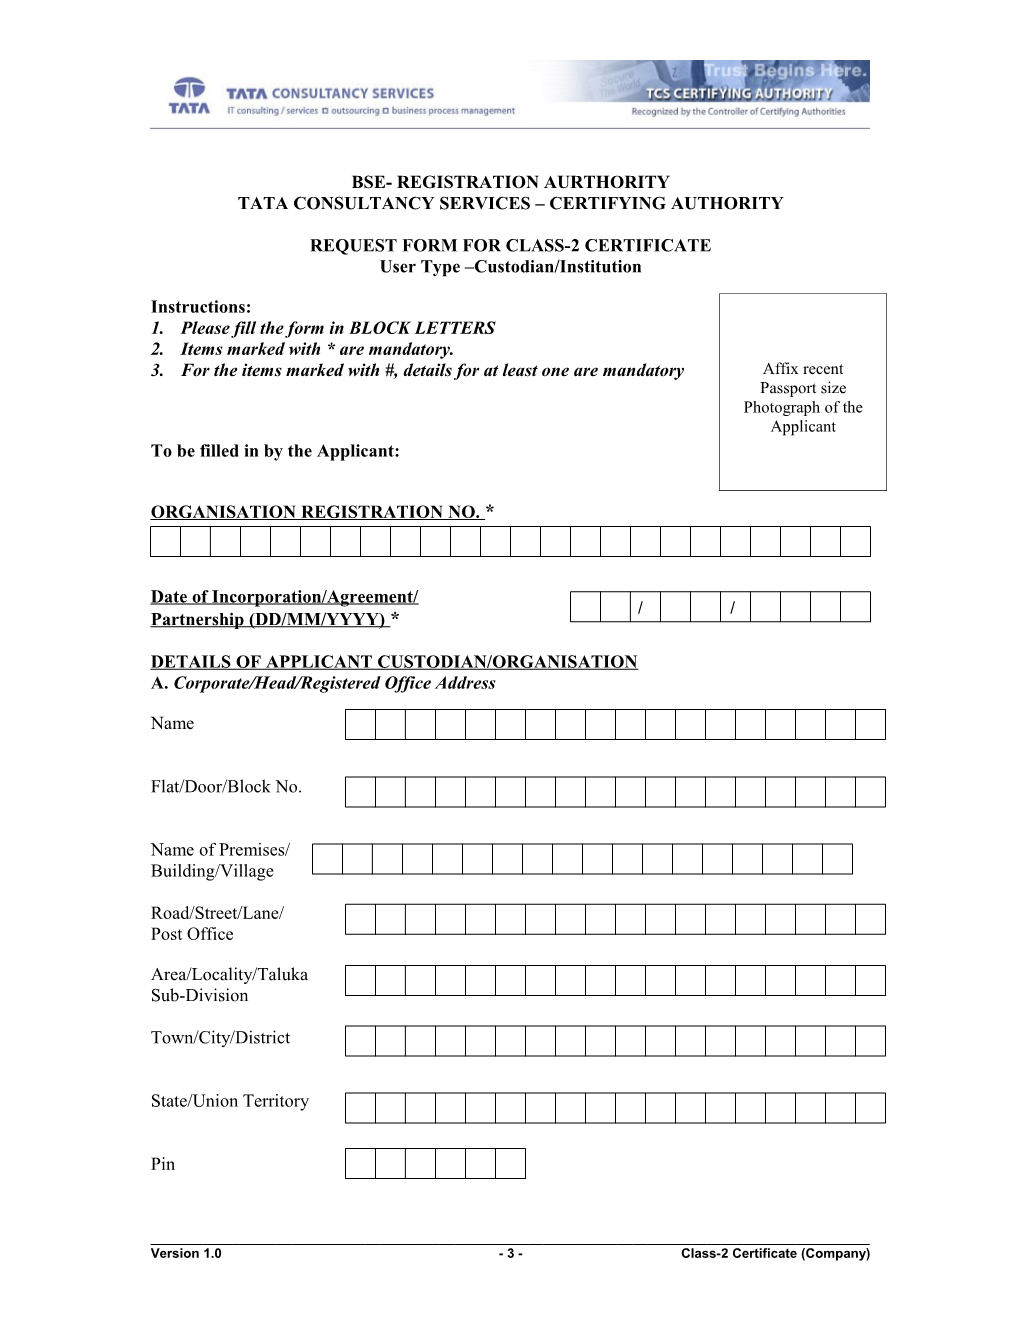 Form for Class-2 COMPANY Type of Cetificate